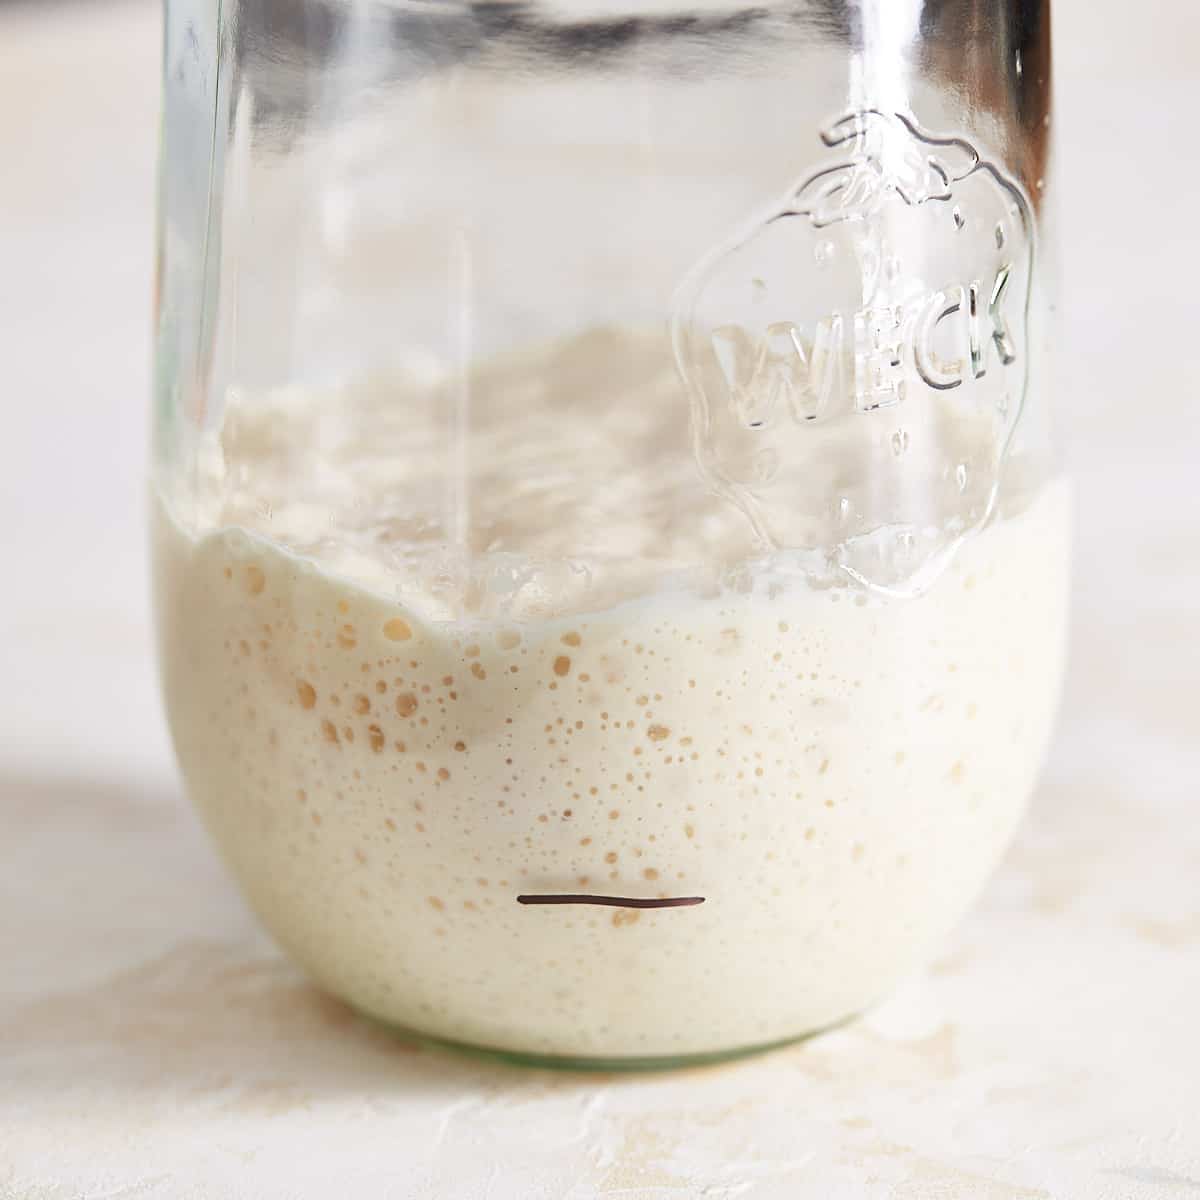 A glass jar half filled with active and bubble sourdough starter